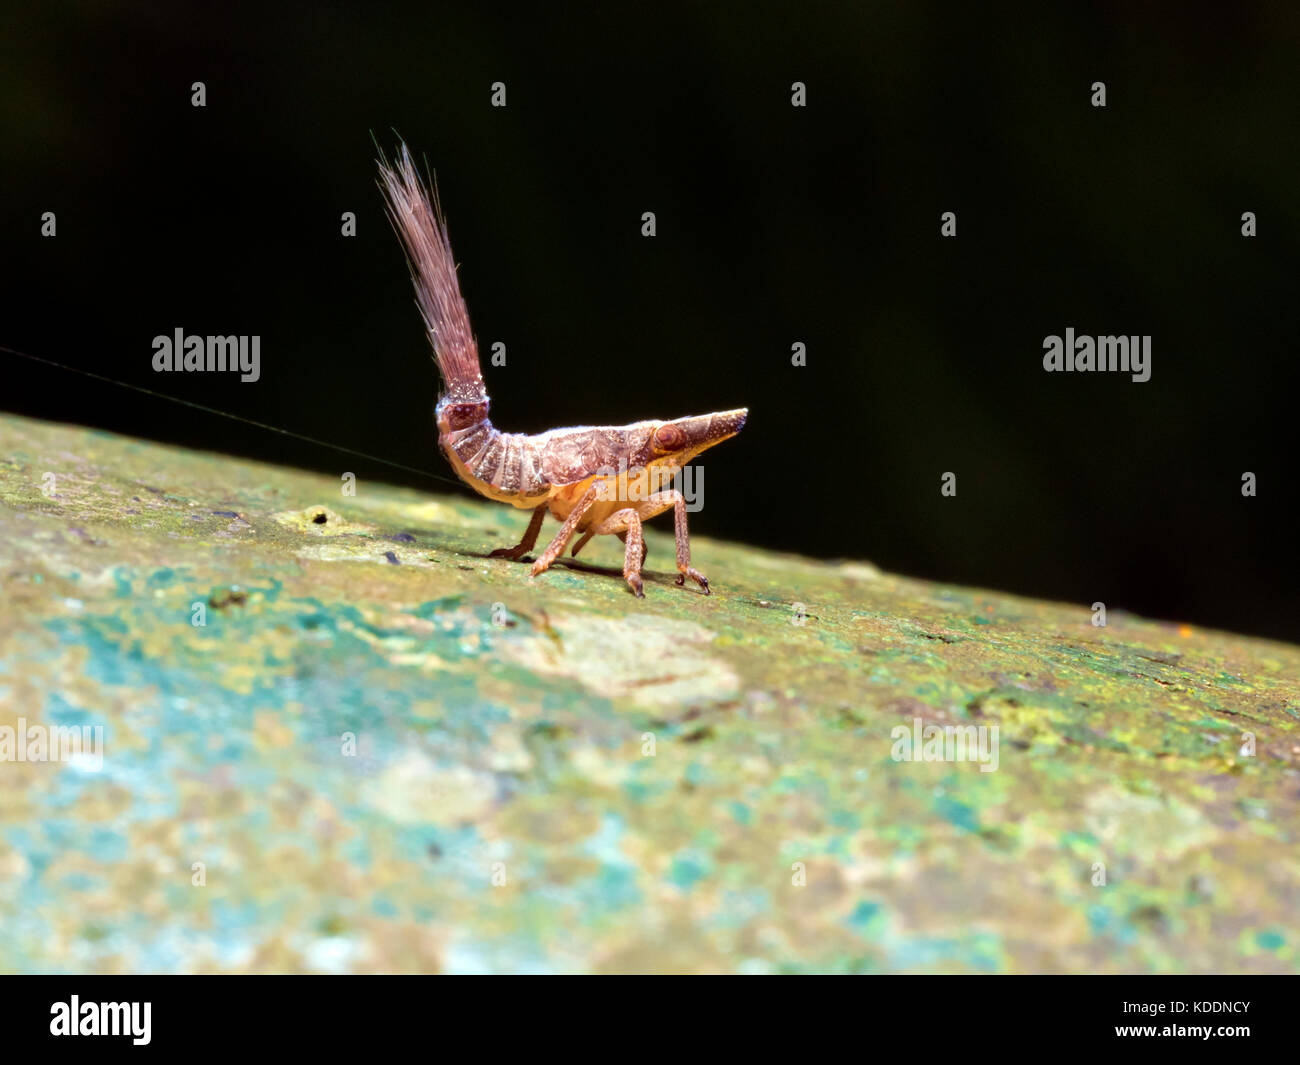 portrait of Issidae nymph,insect Stock Photo